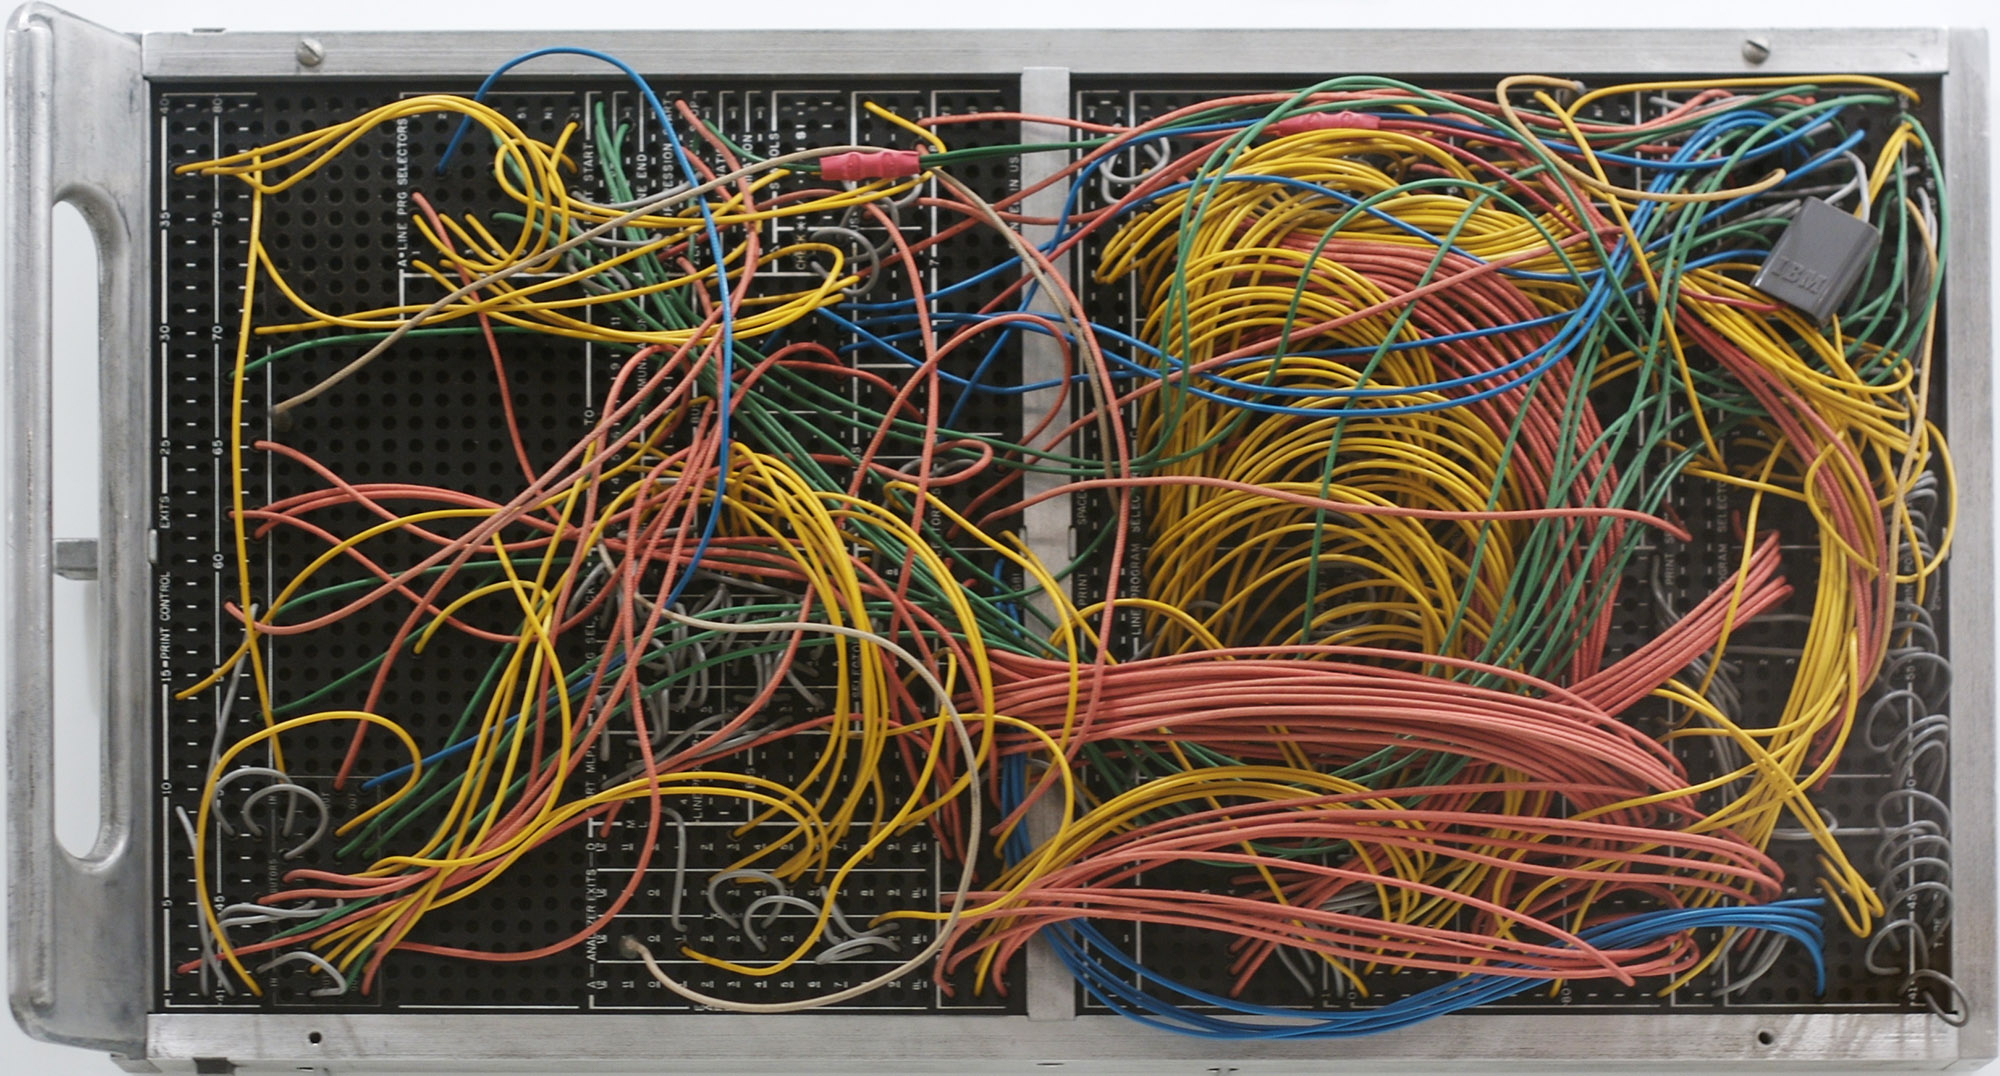 A black plug board in an aluminum frame with many various colored wires plugged into it.